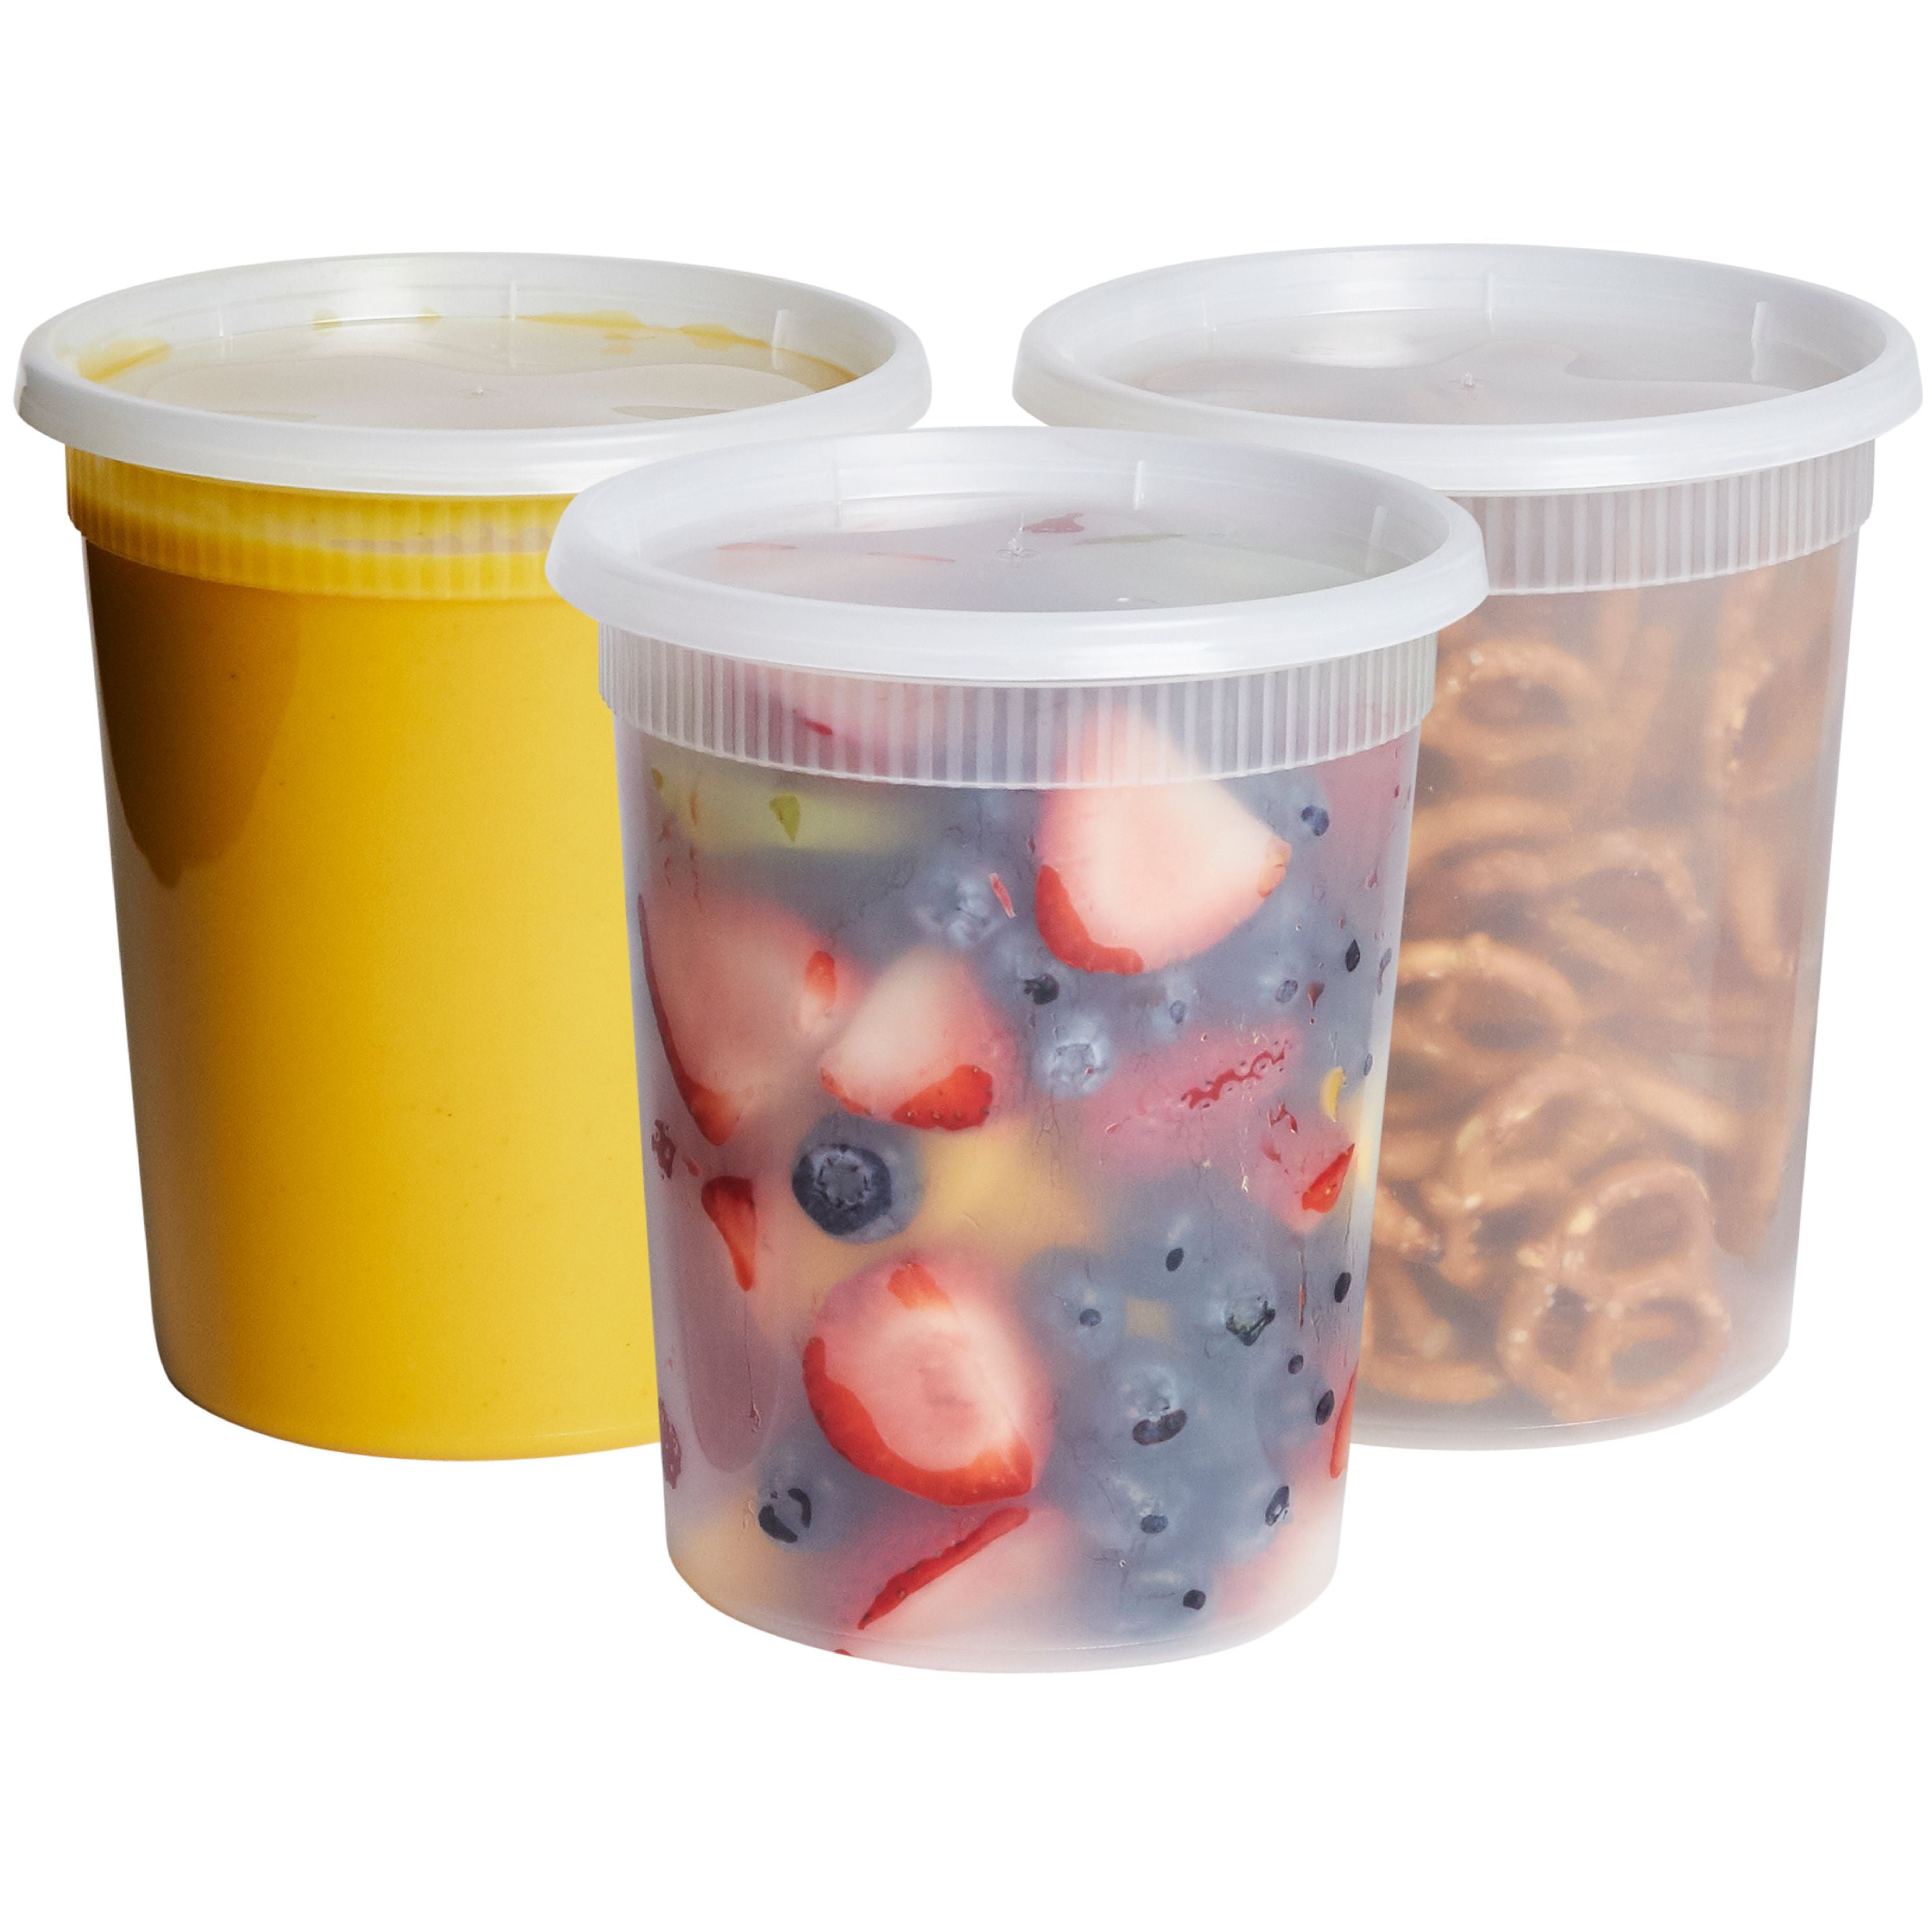 Clear Pla Containers Fridge Dishwasher Microwave Food Safe-Deli Pots With Lids 